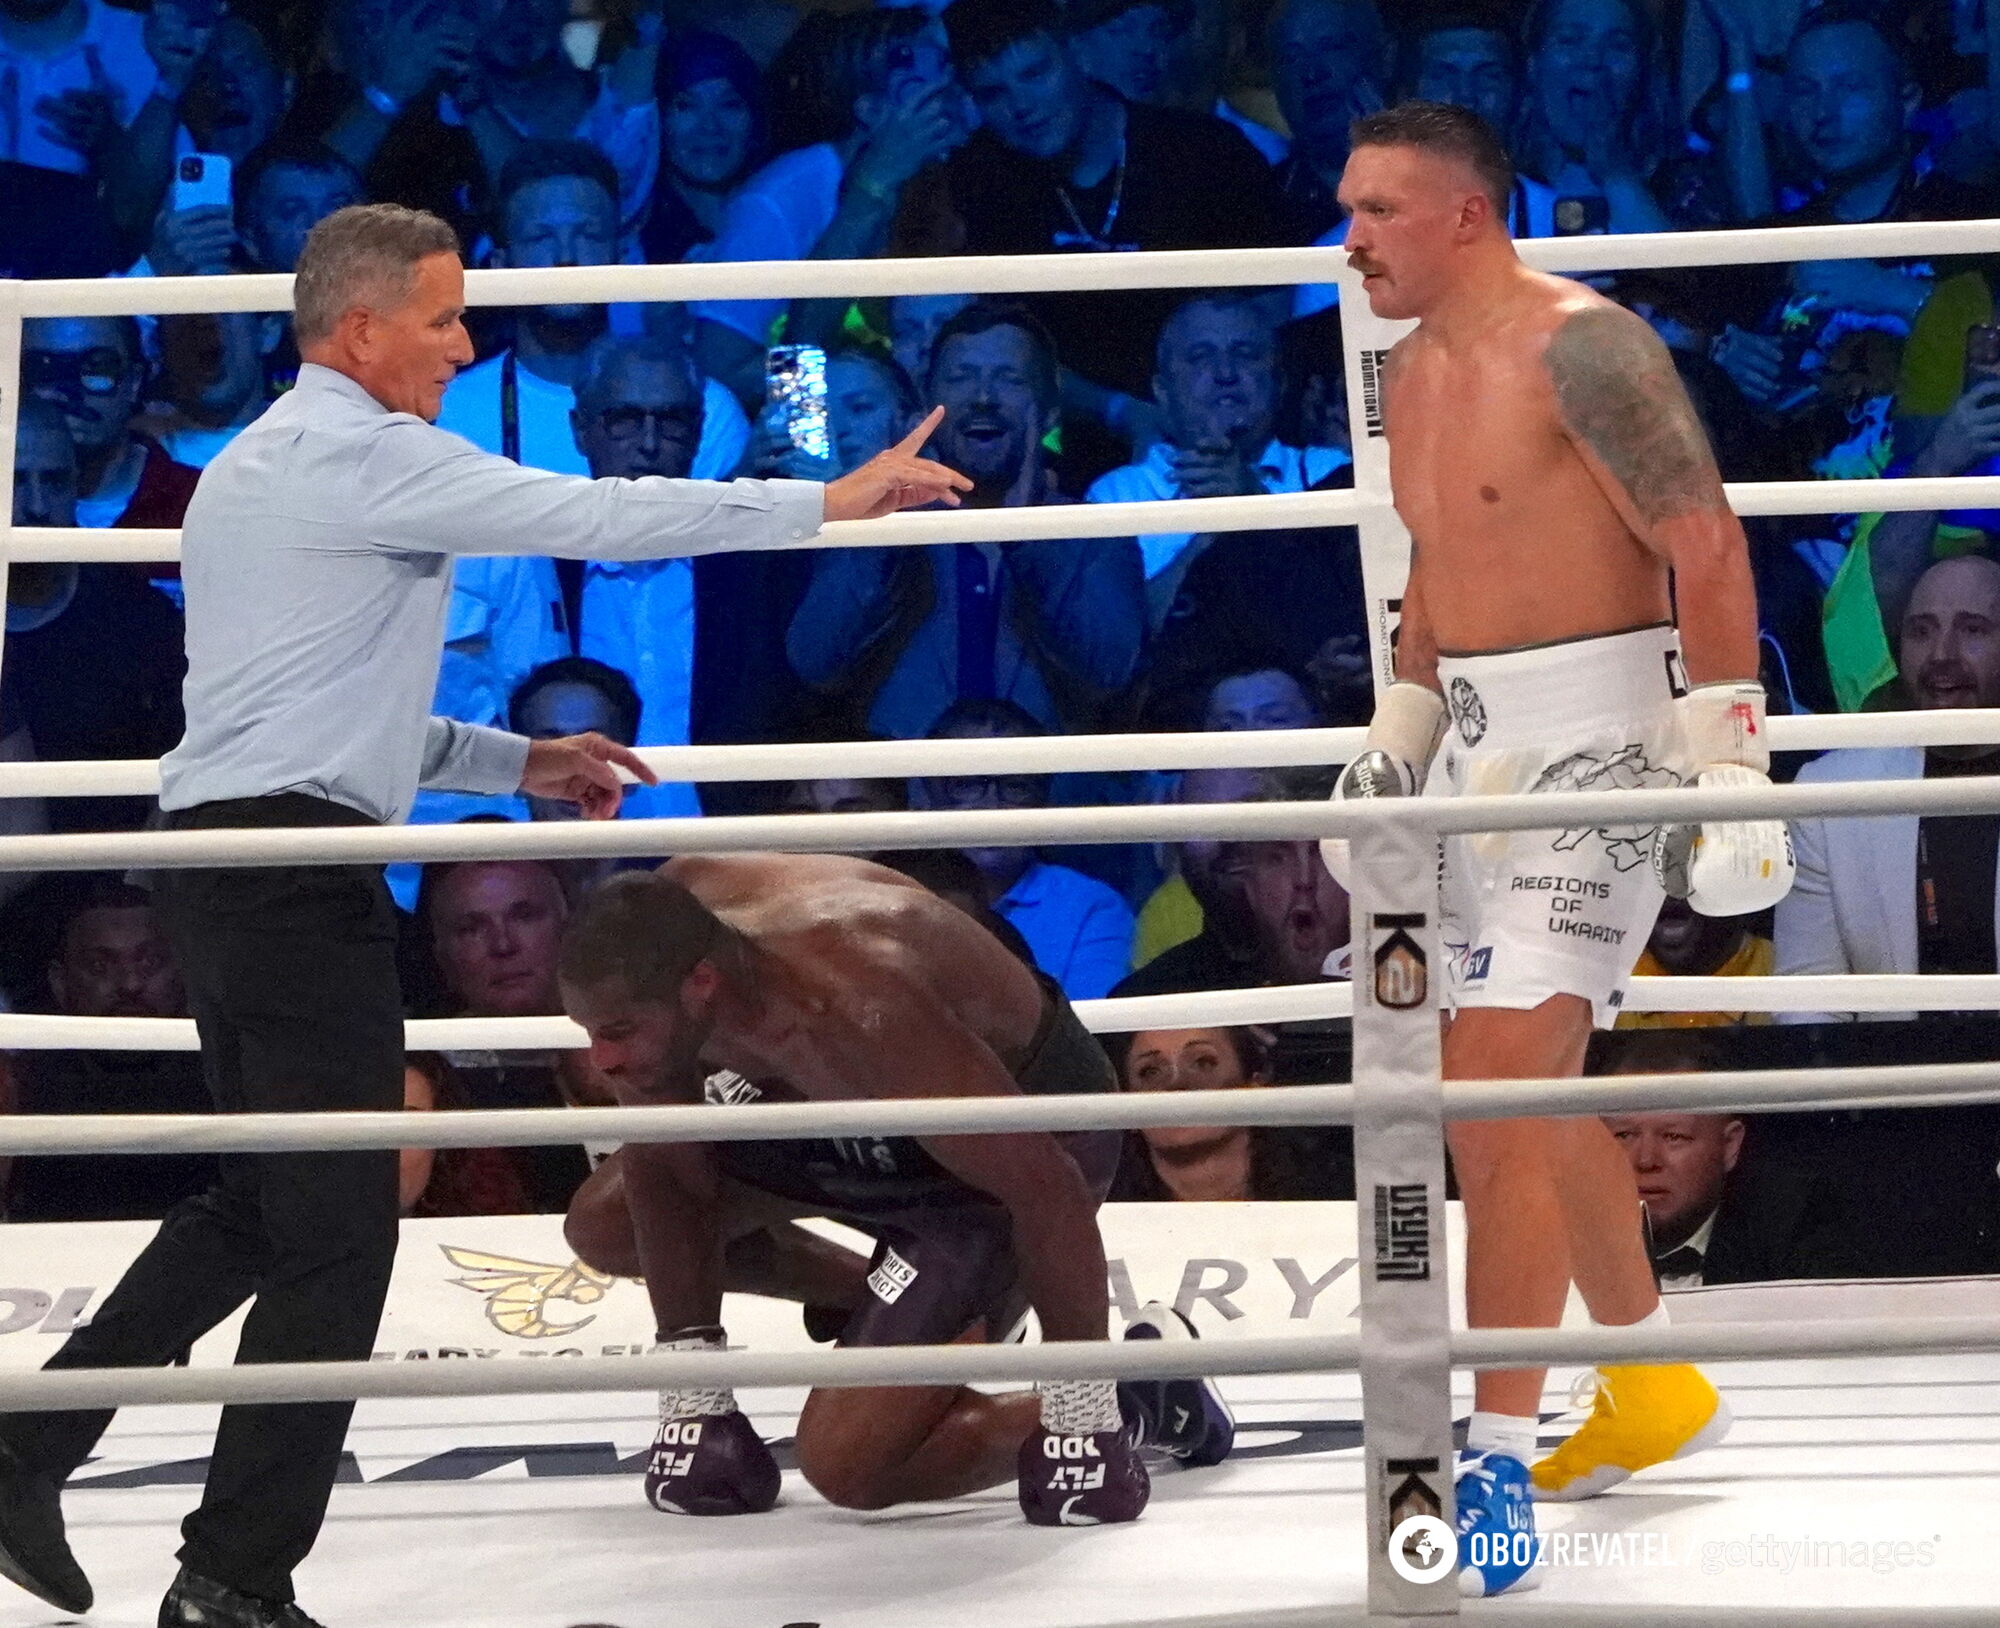 Usyk celebrated his victory over Dubois with a dance. Video